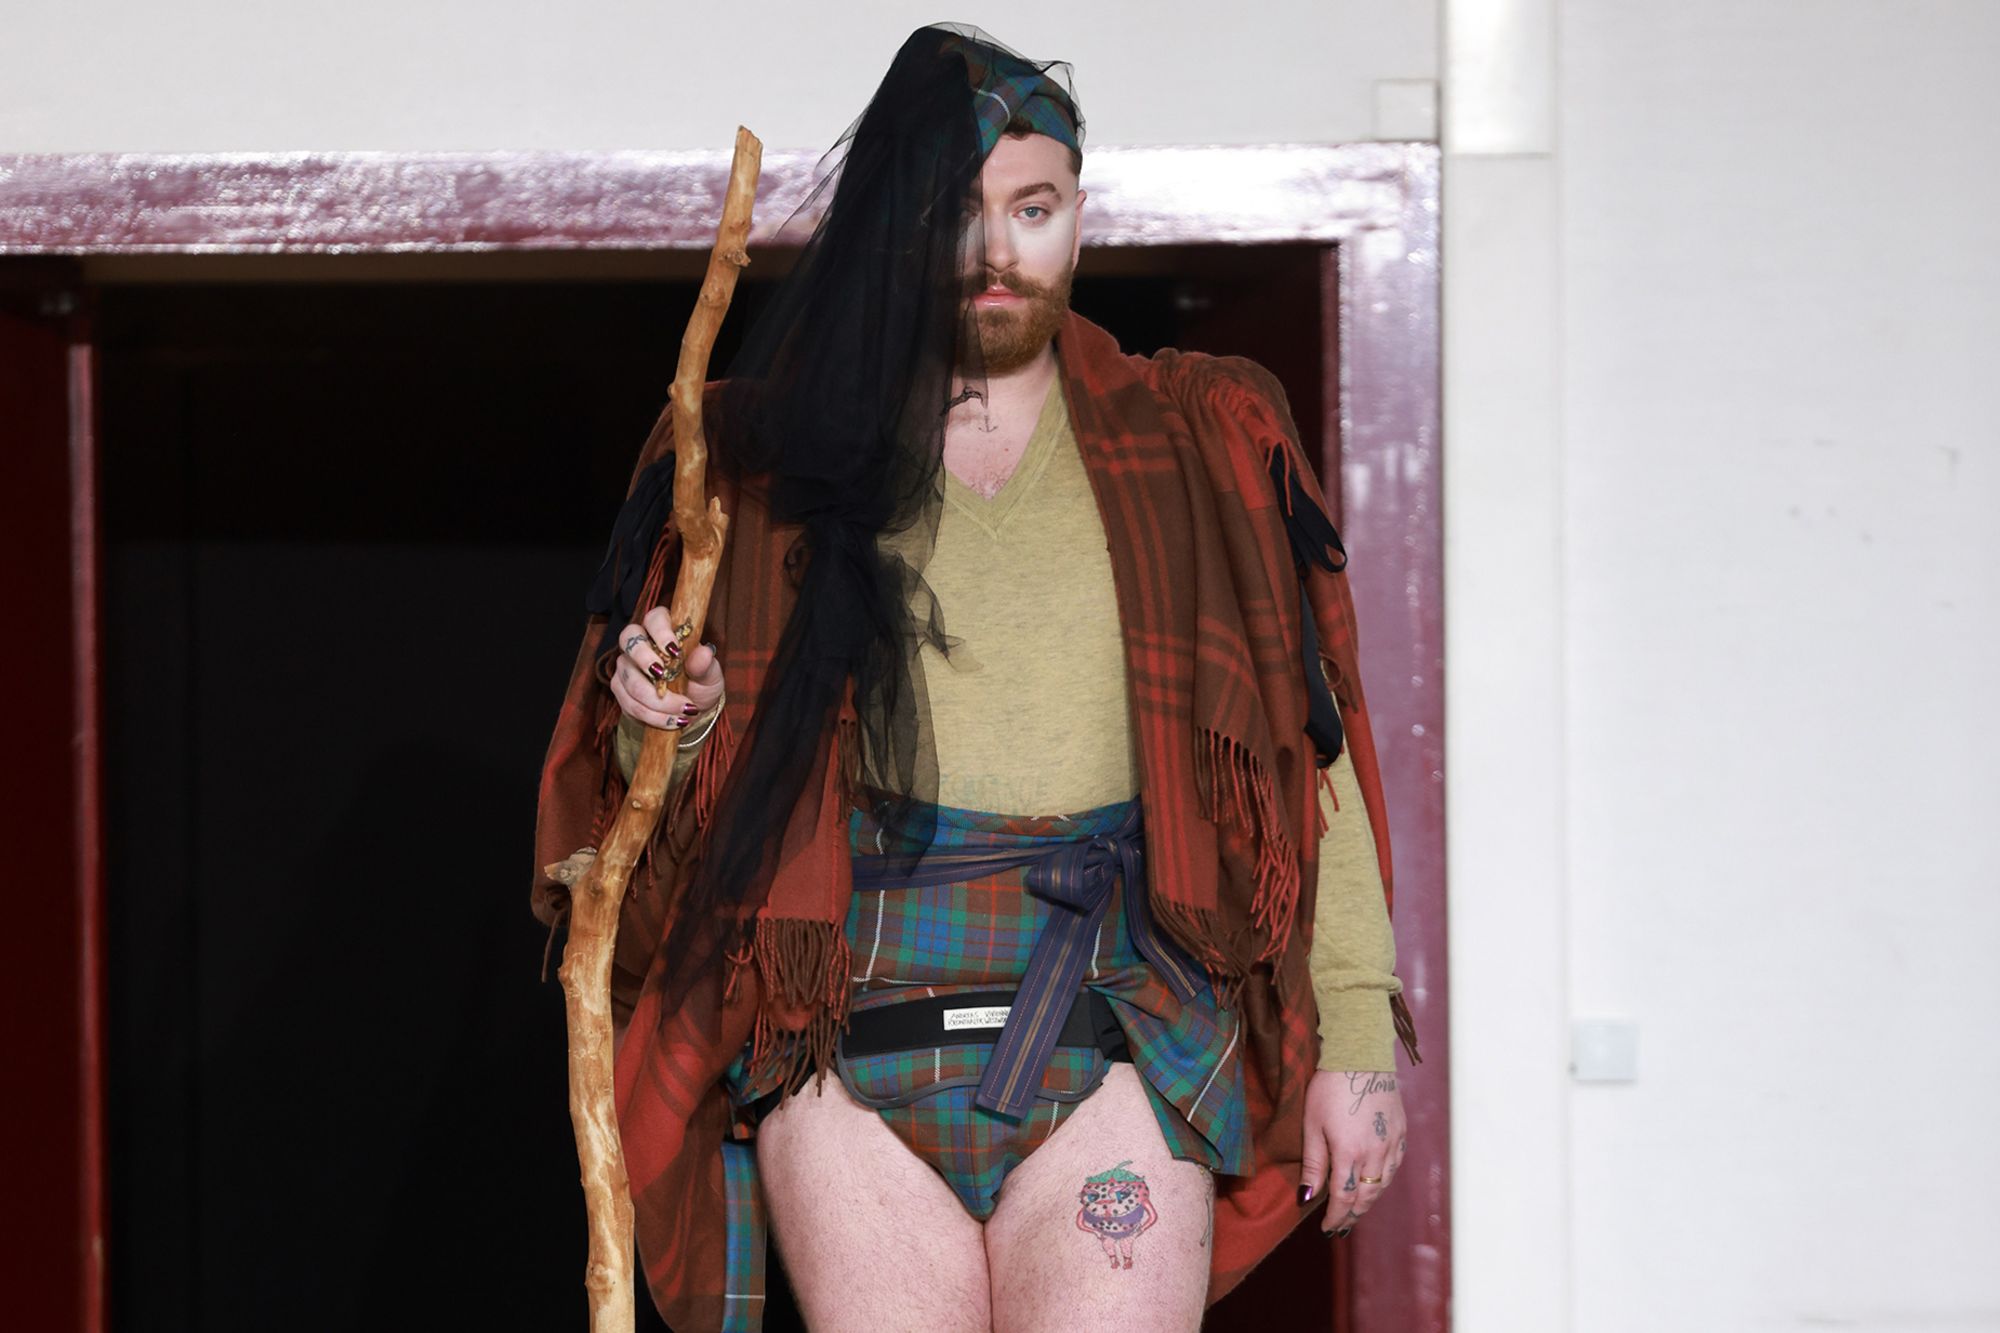 Sam Smith's opening look for the latest Vivienne Westwood show in Paris has divided opinion online.